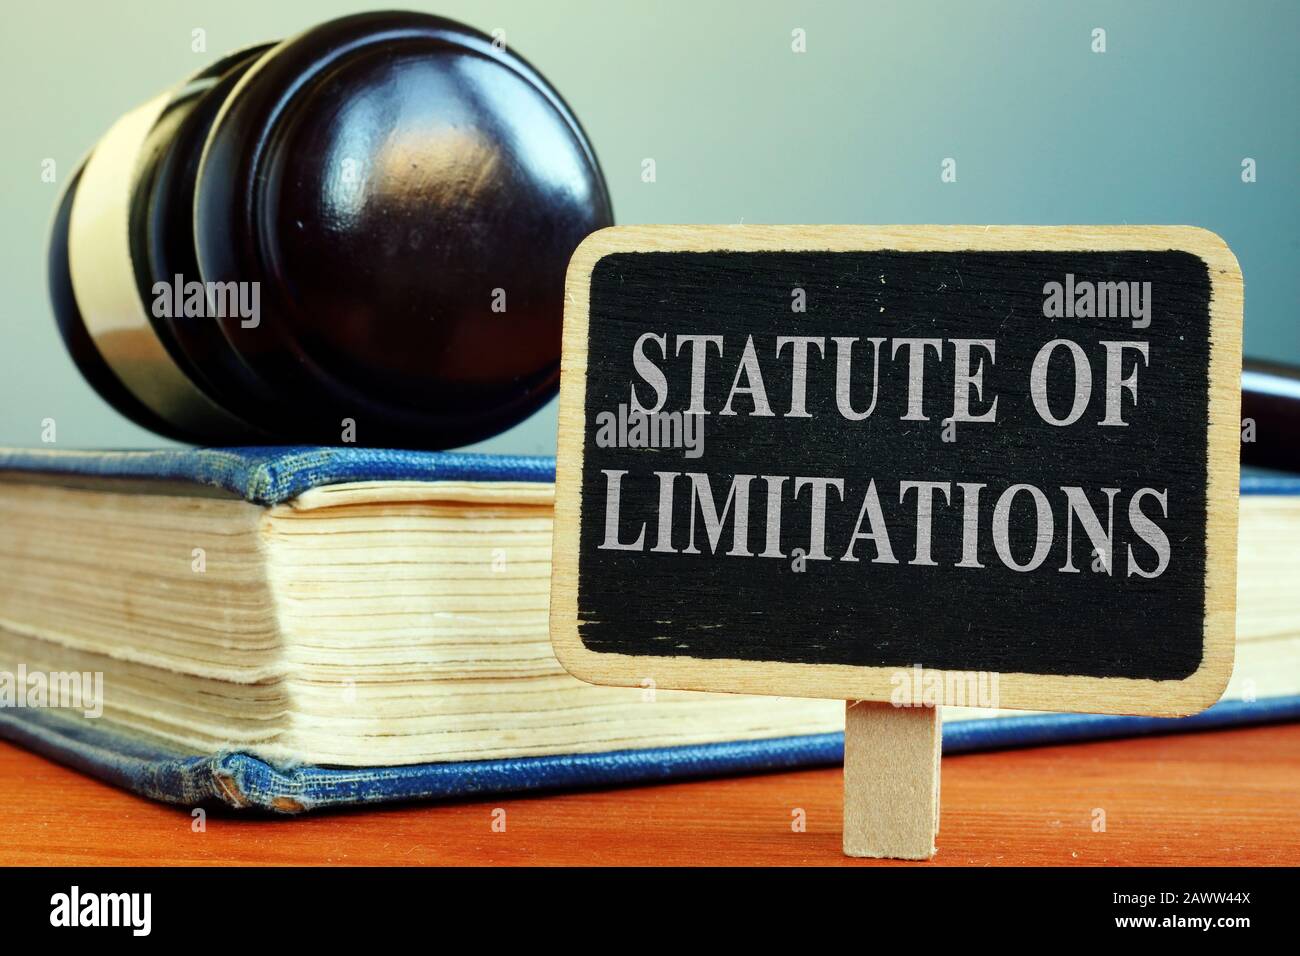 statute of limitations sign book and gavel 2AWW44X